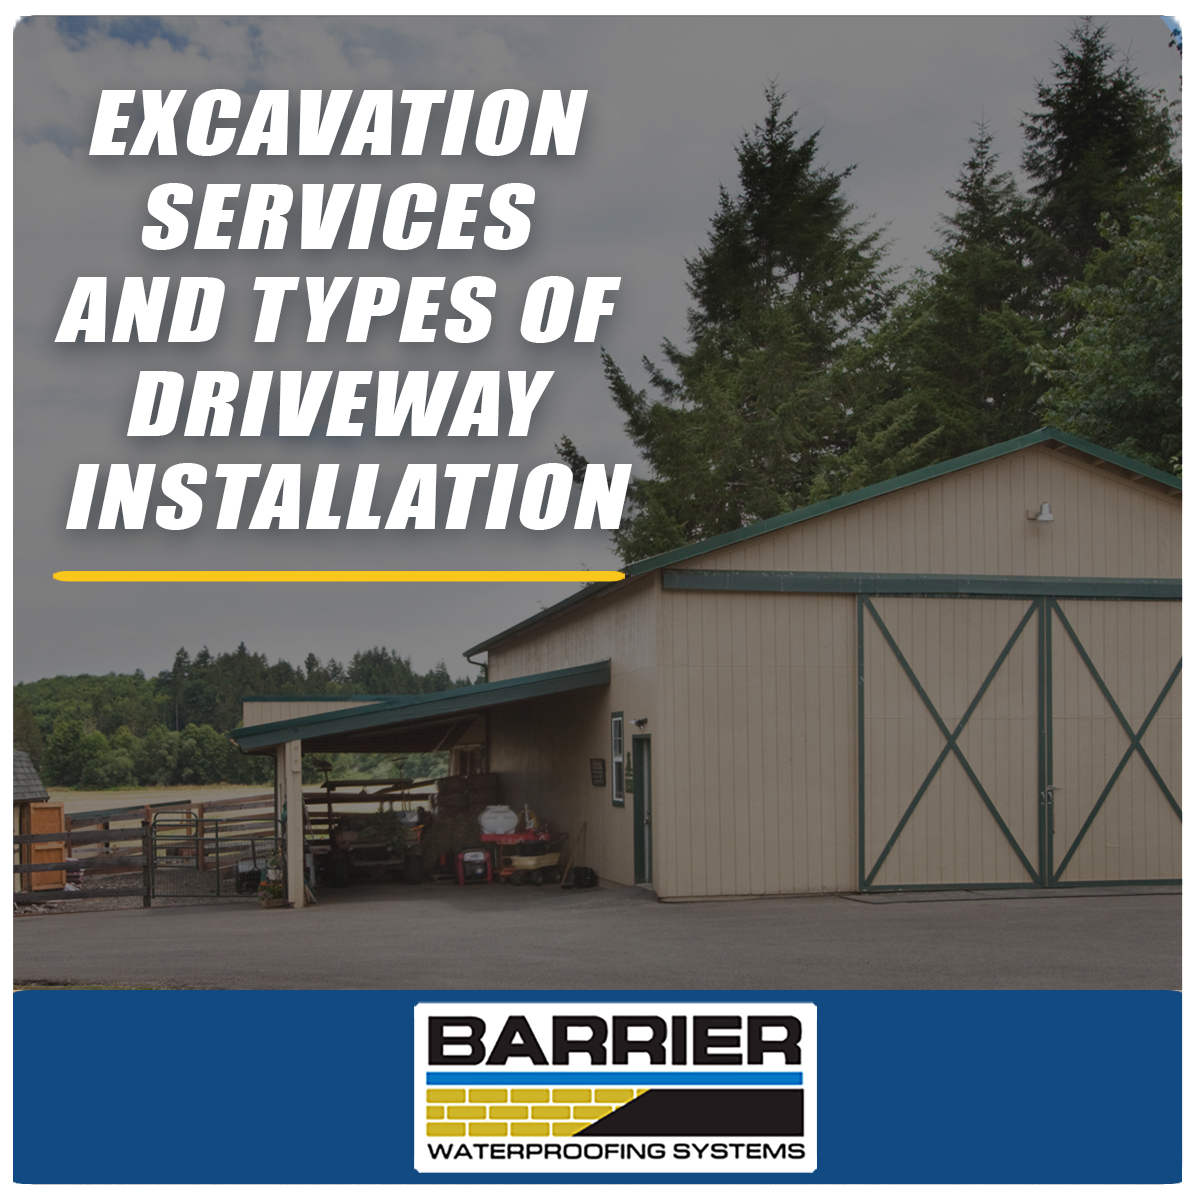 Excavation-Services-and-Types-of-Driveway-Installation